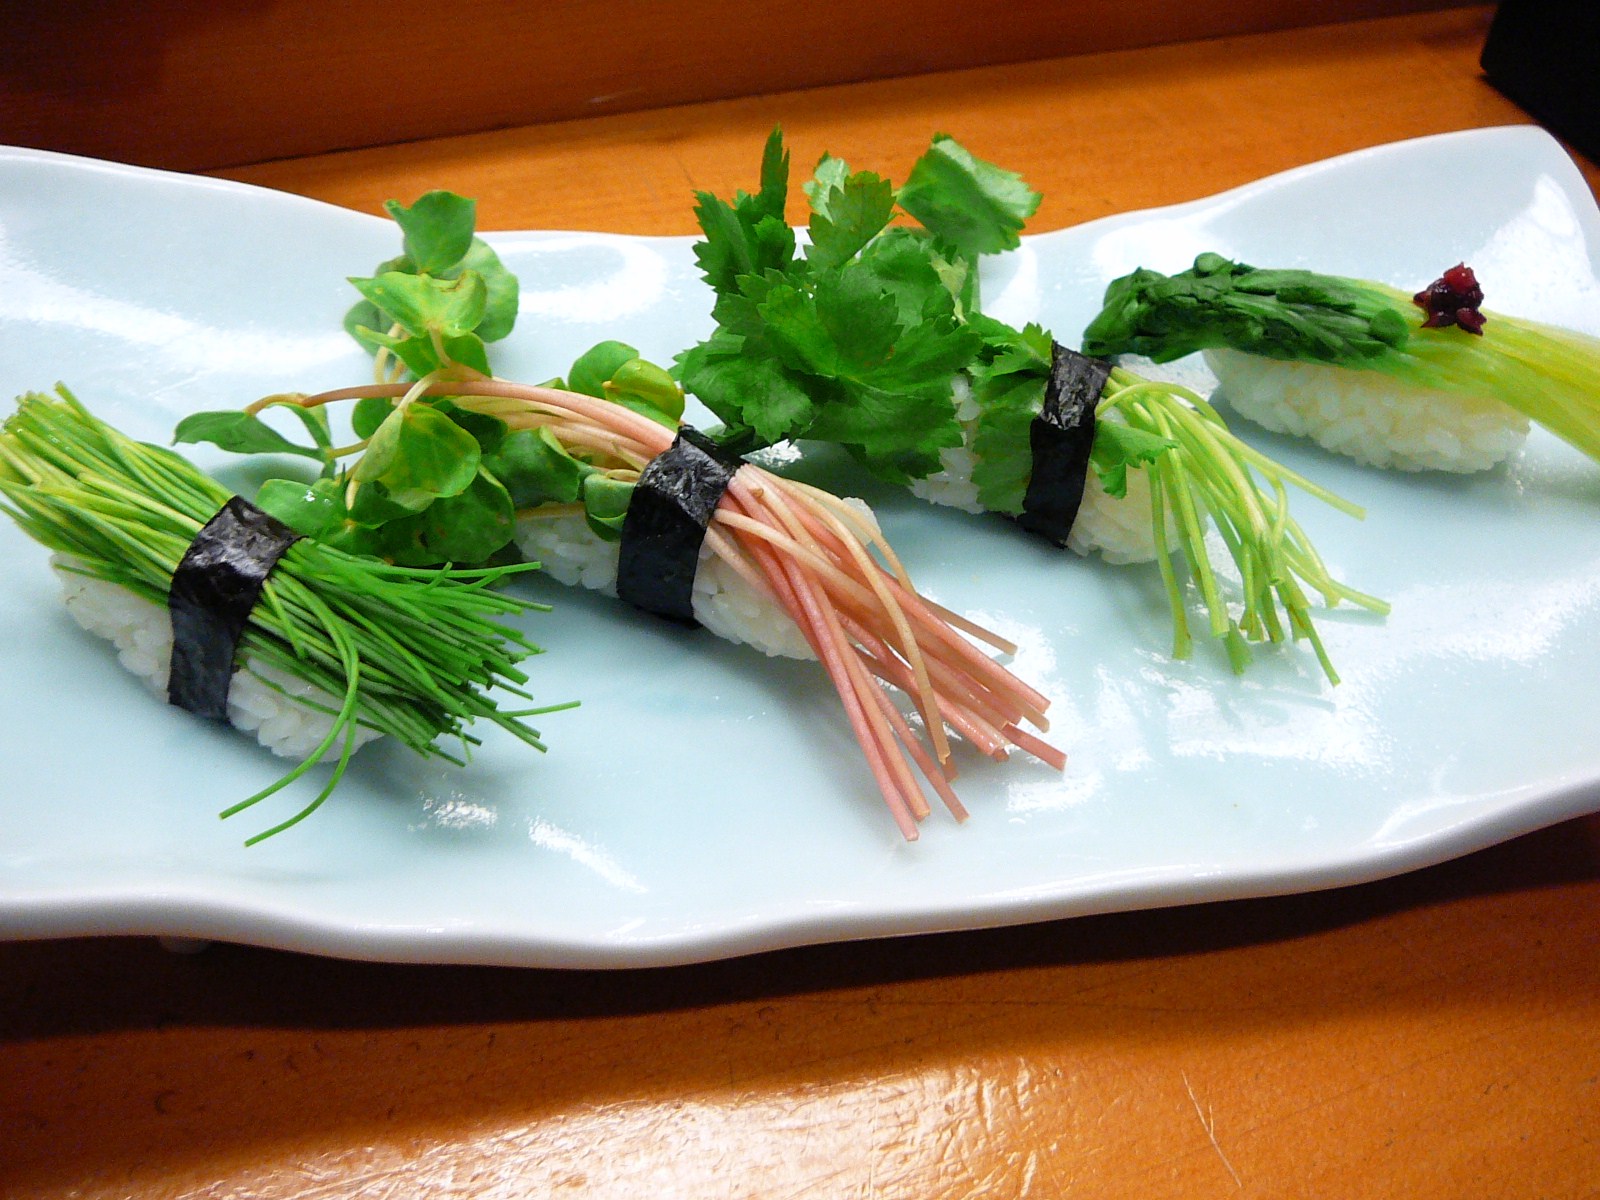 Which ingredient is typically used to bind the rice grains together in sushi rice?